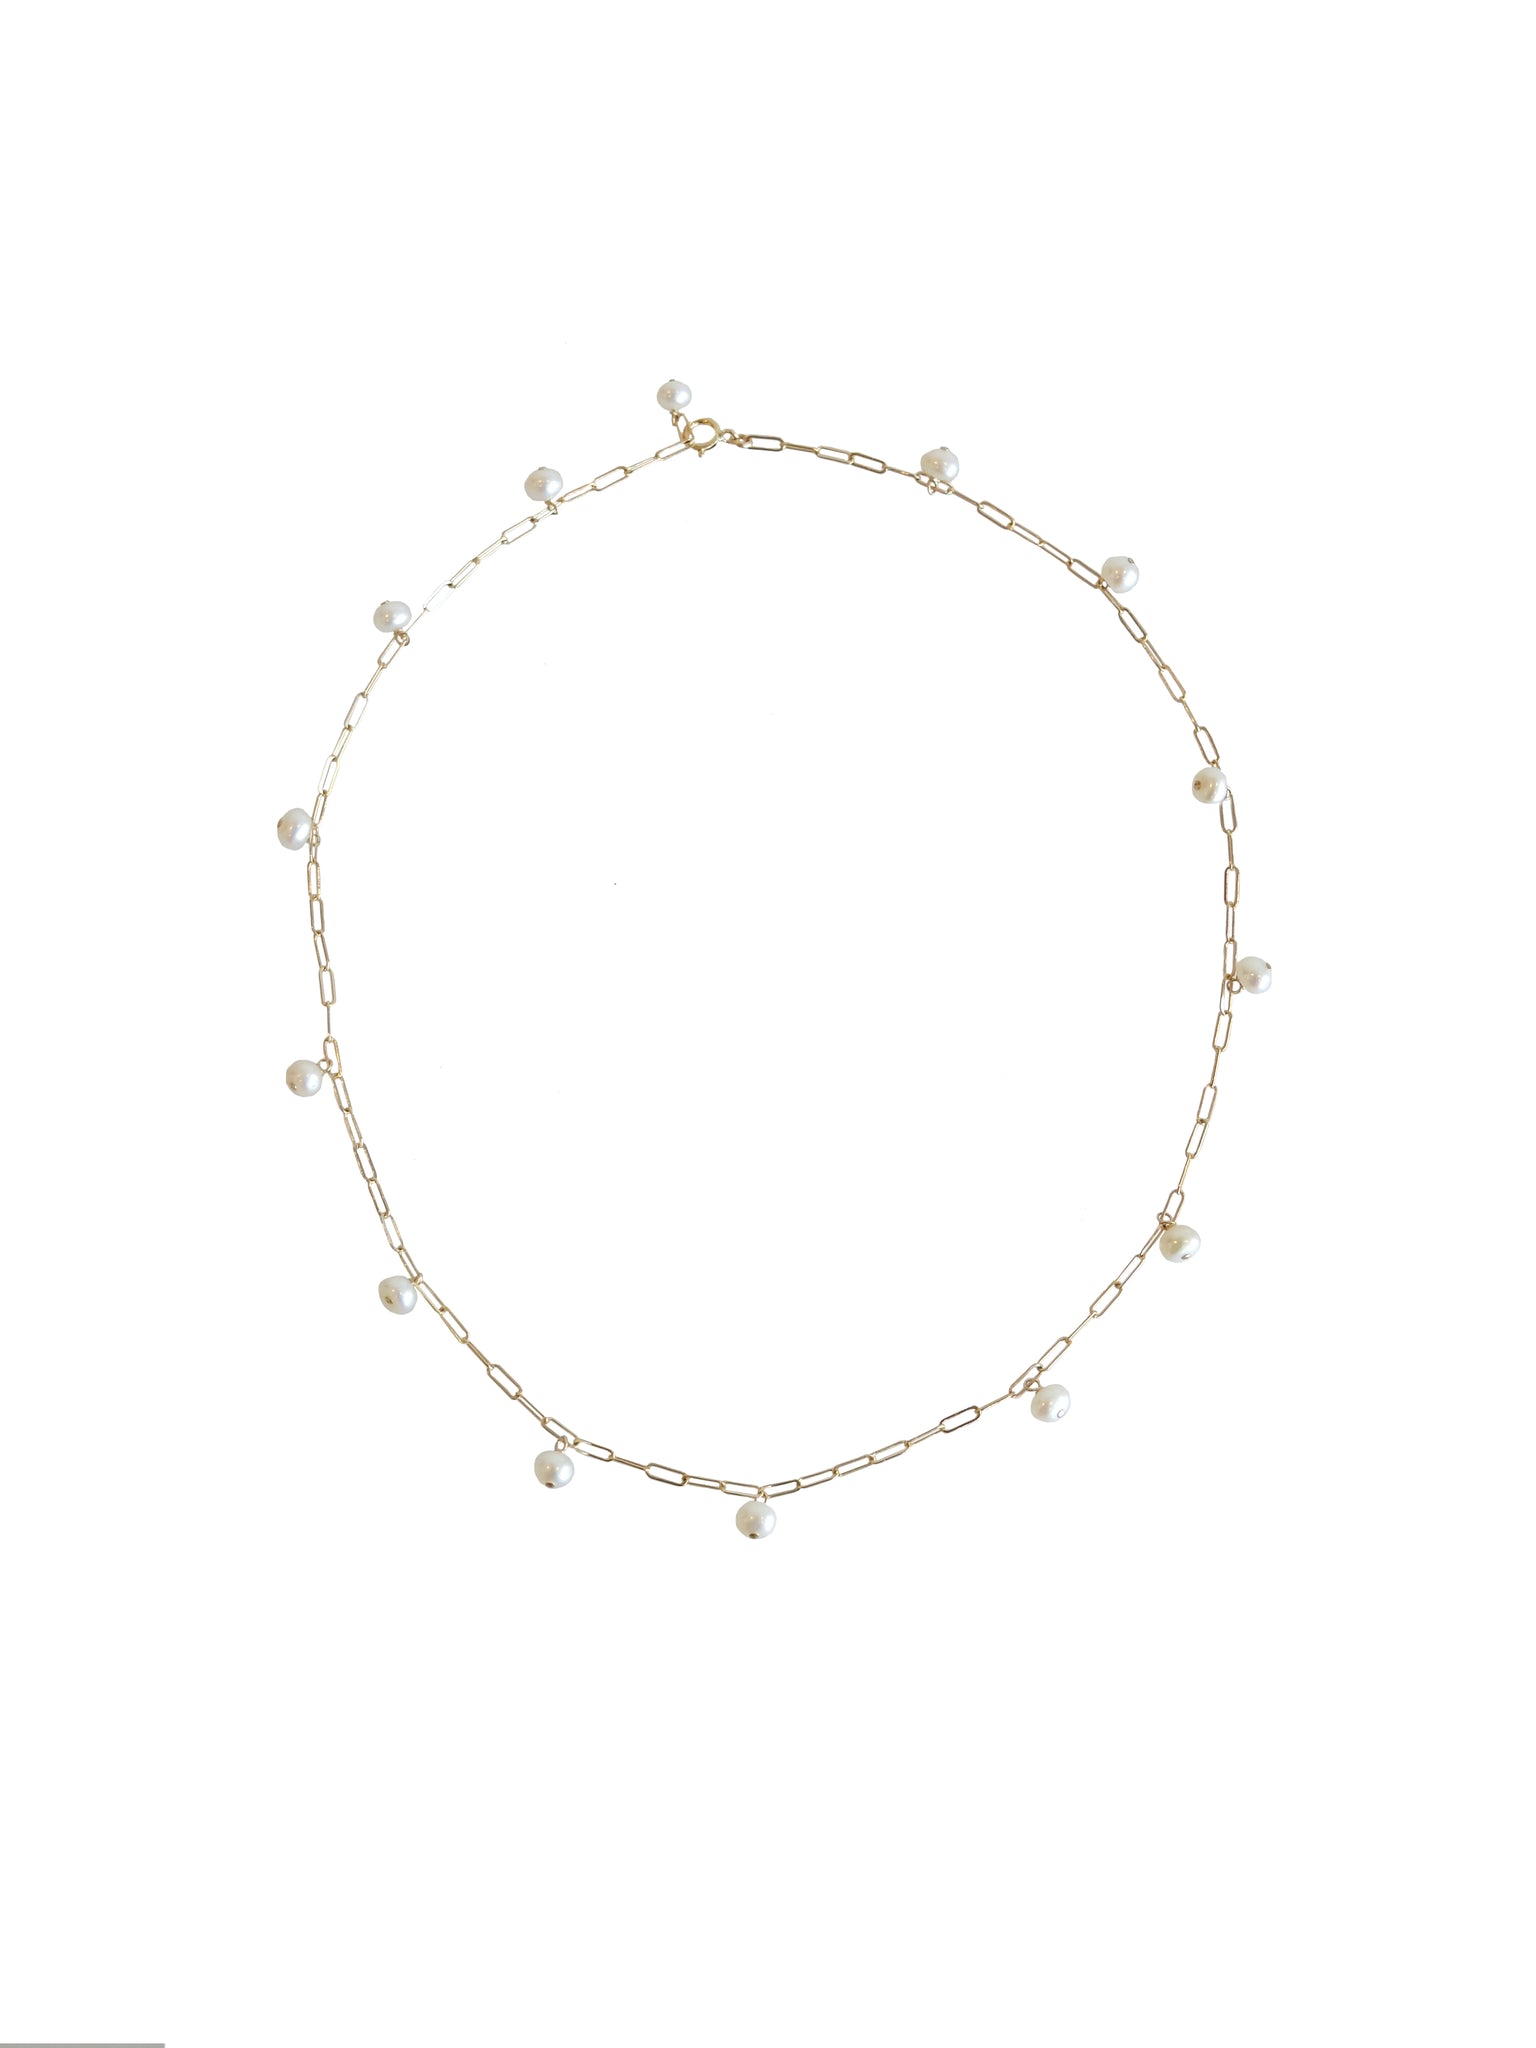 Vista Necklace- Freshwater Pearls